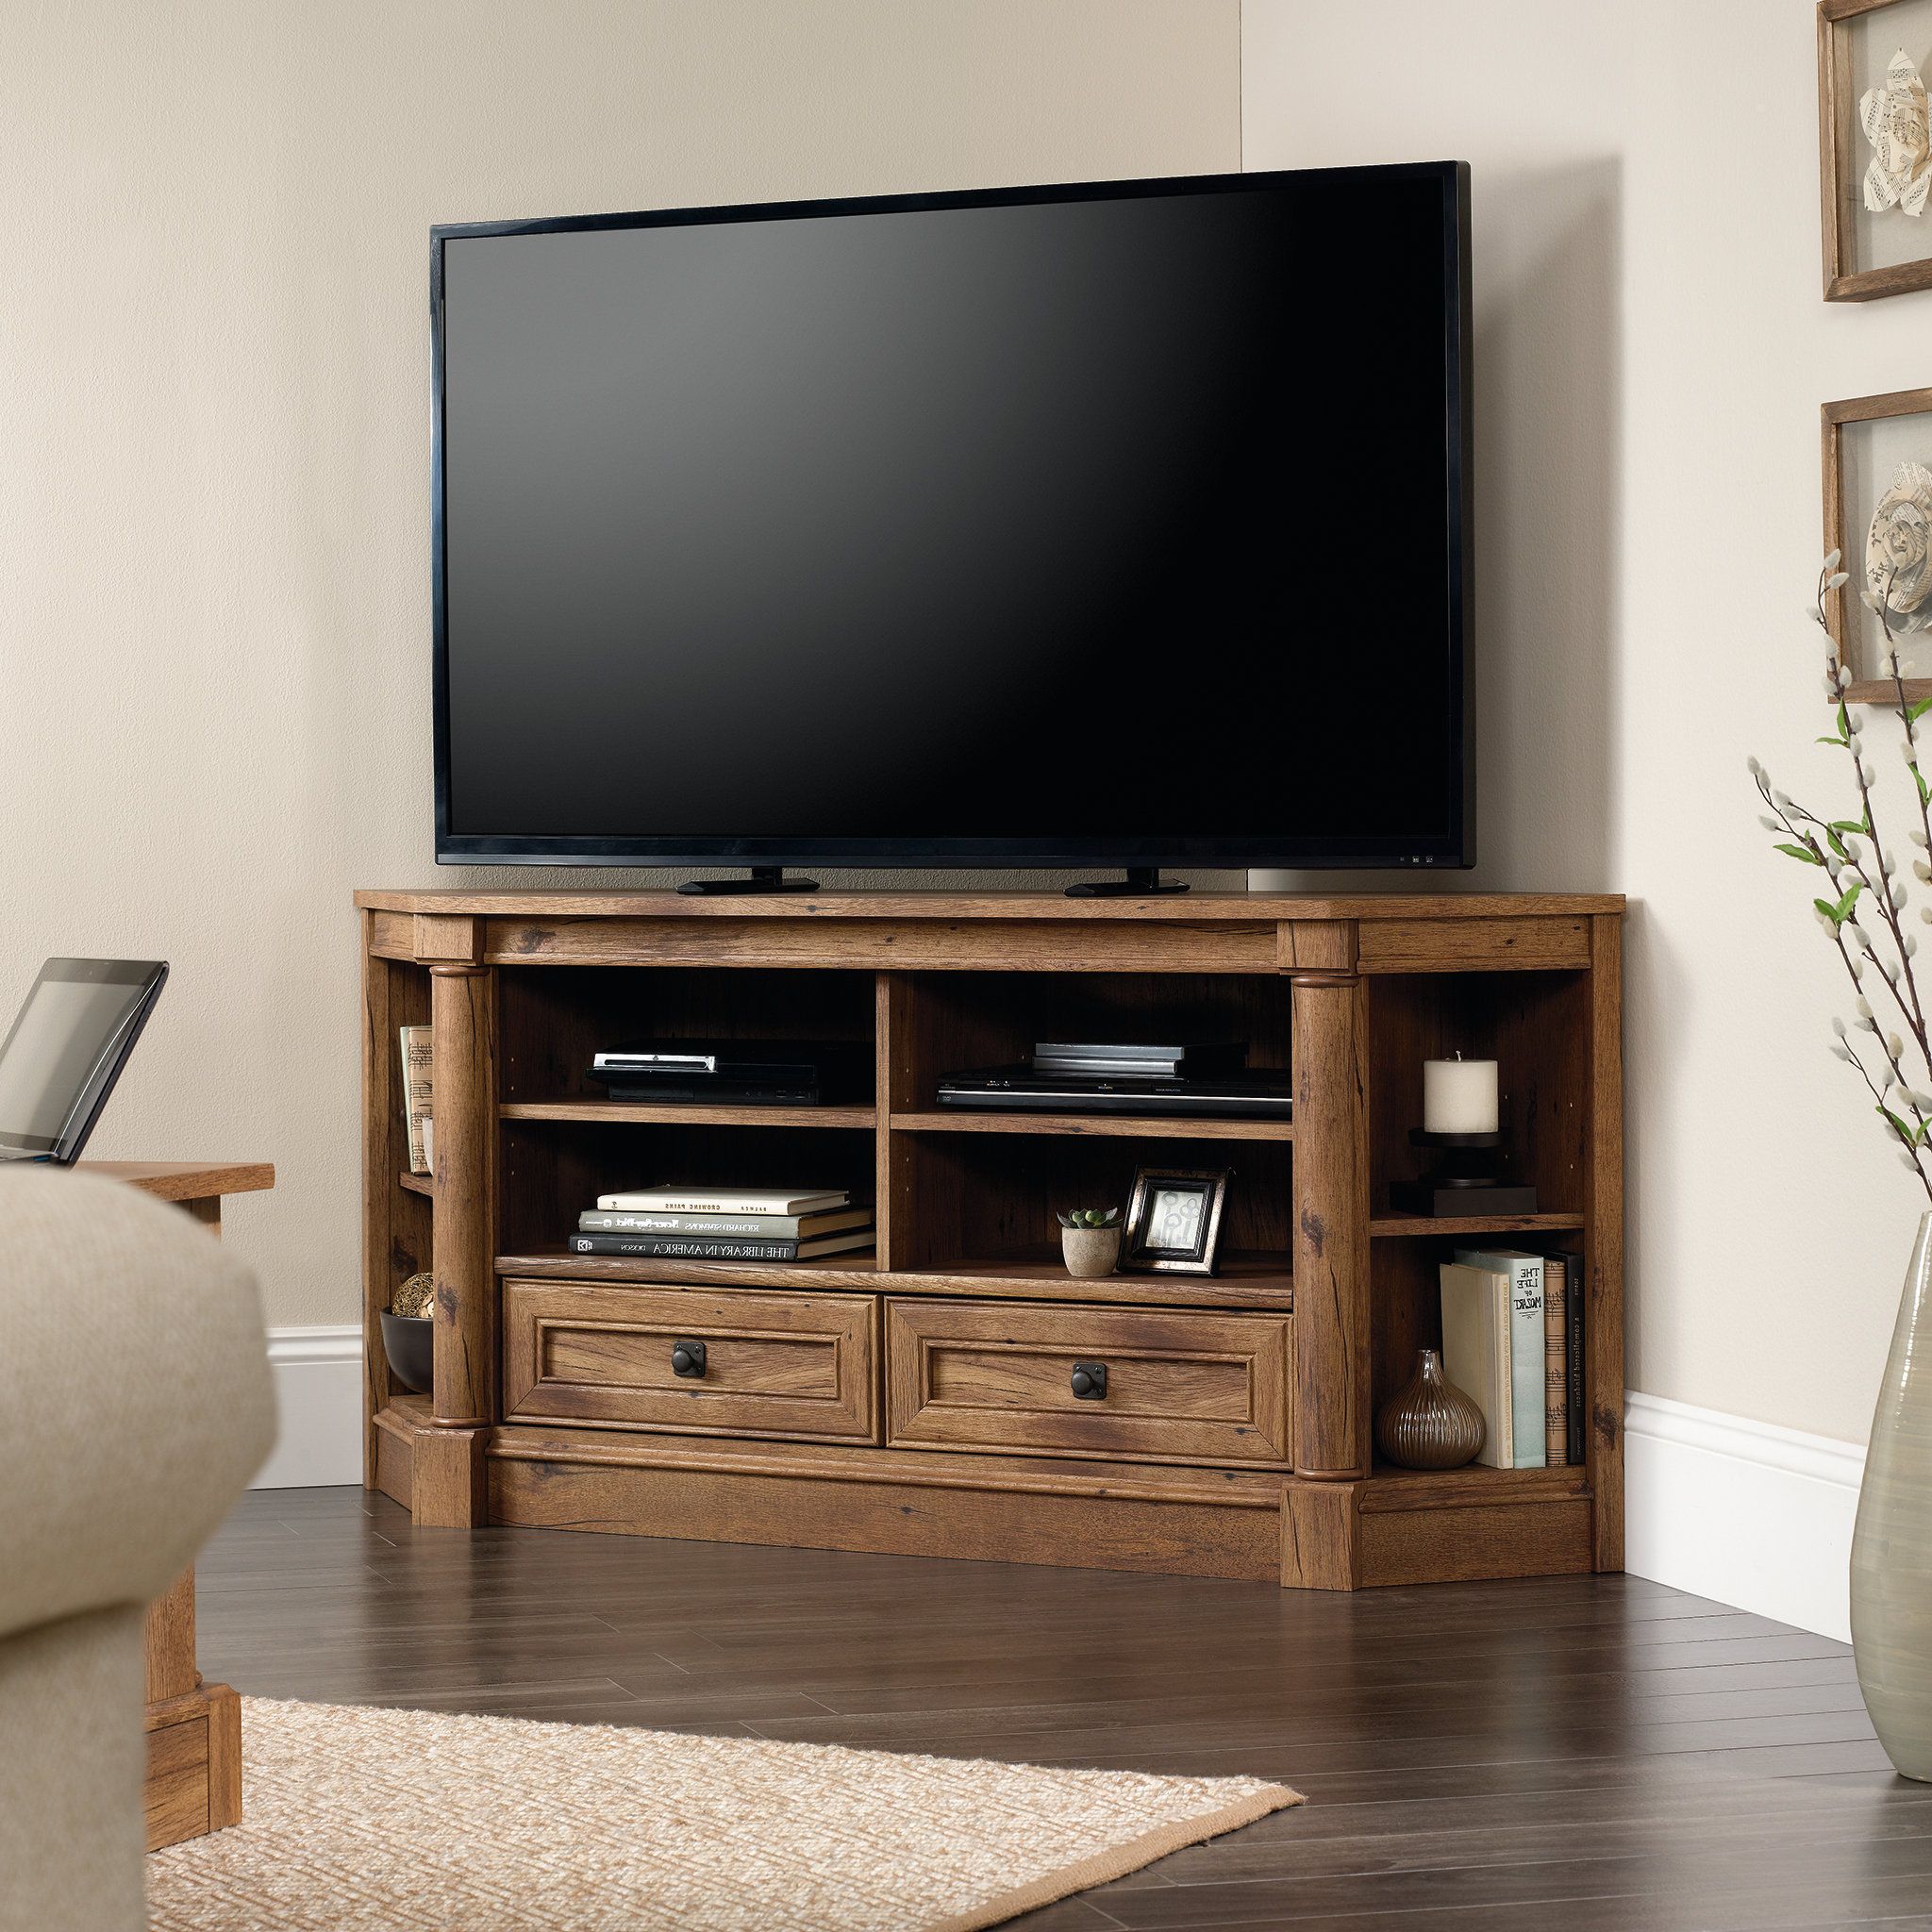 Three Posts Orviston Corner Tv Stand For Tvs Up To 60" & Reviews With Dixon Black 65 Inch Highboy Tv Stands (View 1 of 20)